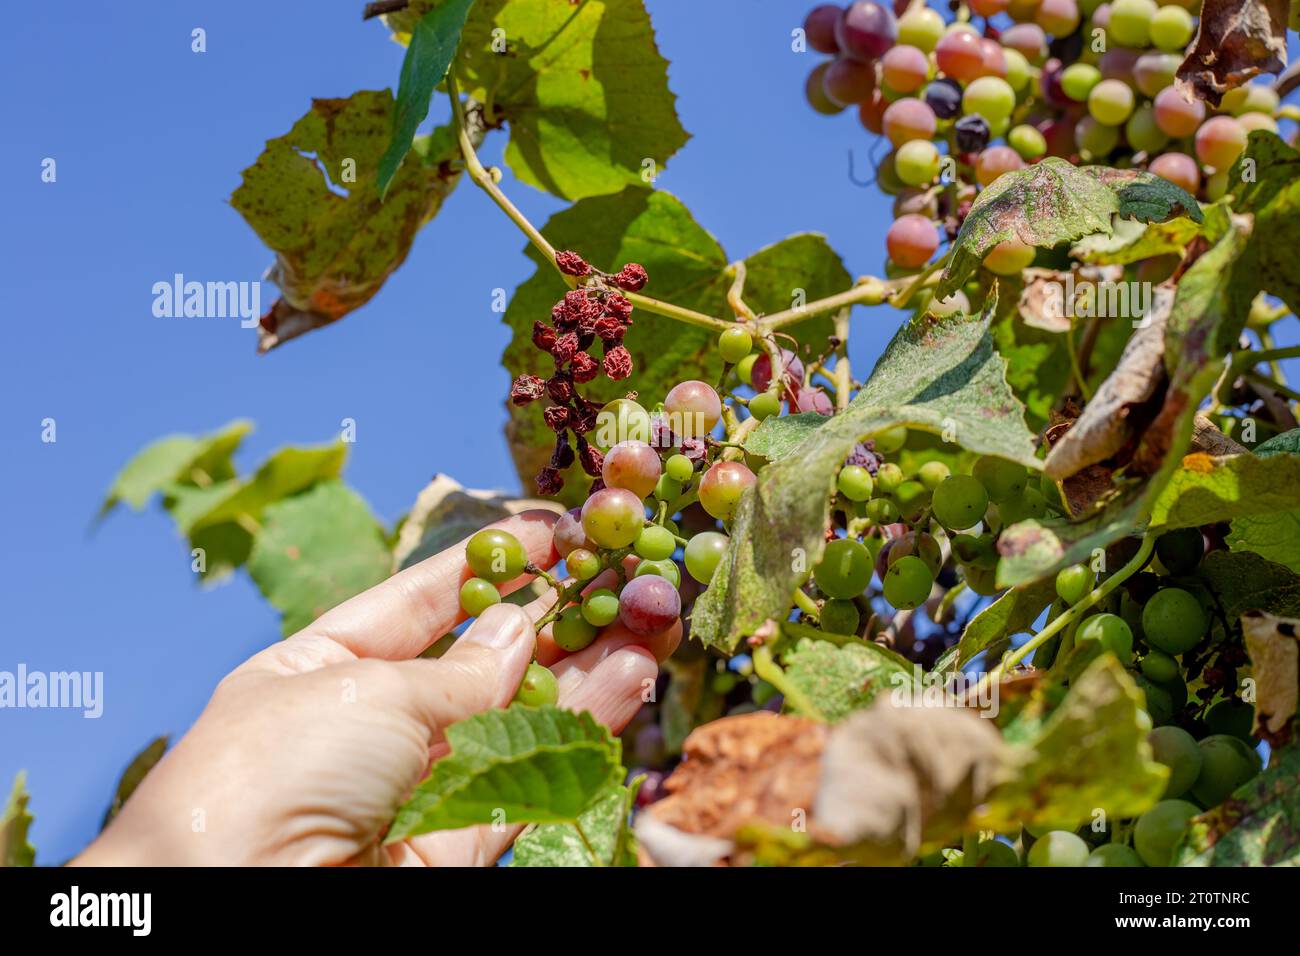 a gardener examines sick ripening grapes. Bunches of grapes on the vine. Stock Photo